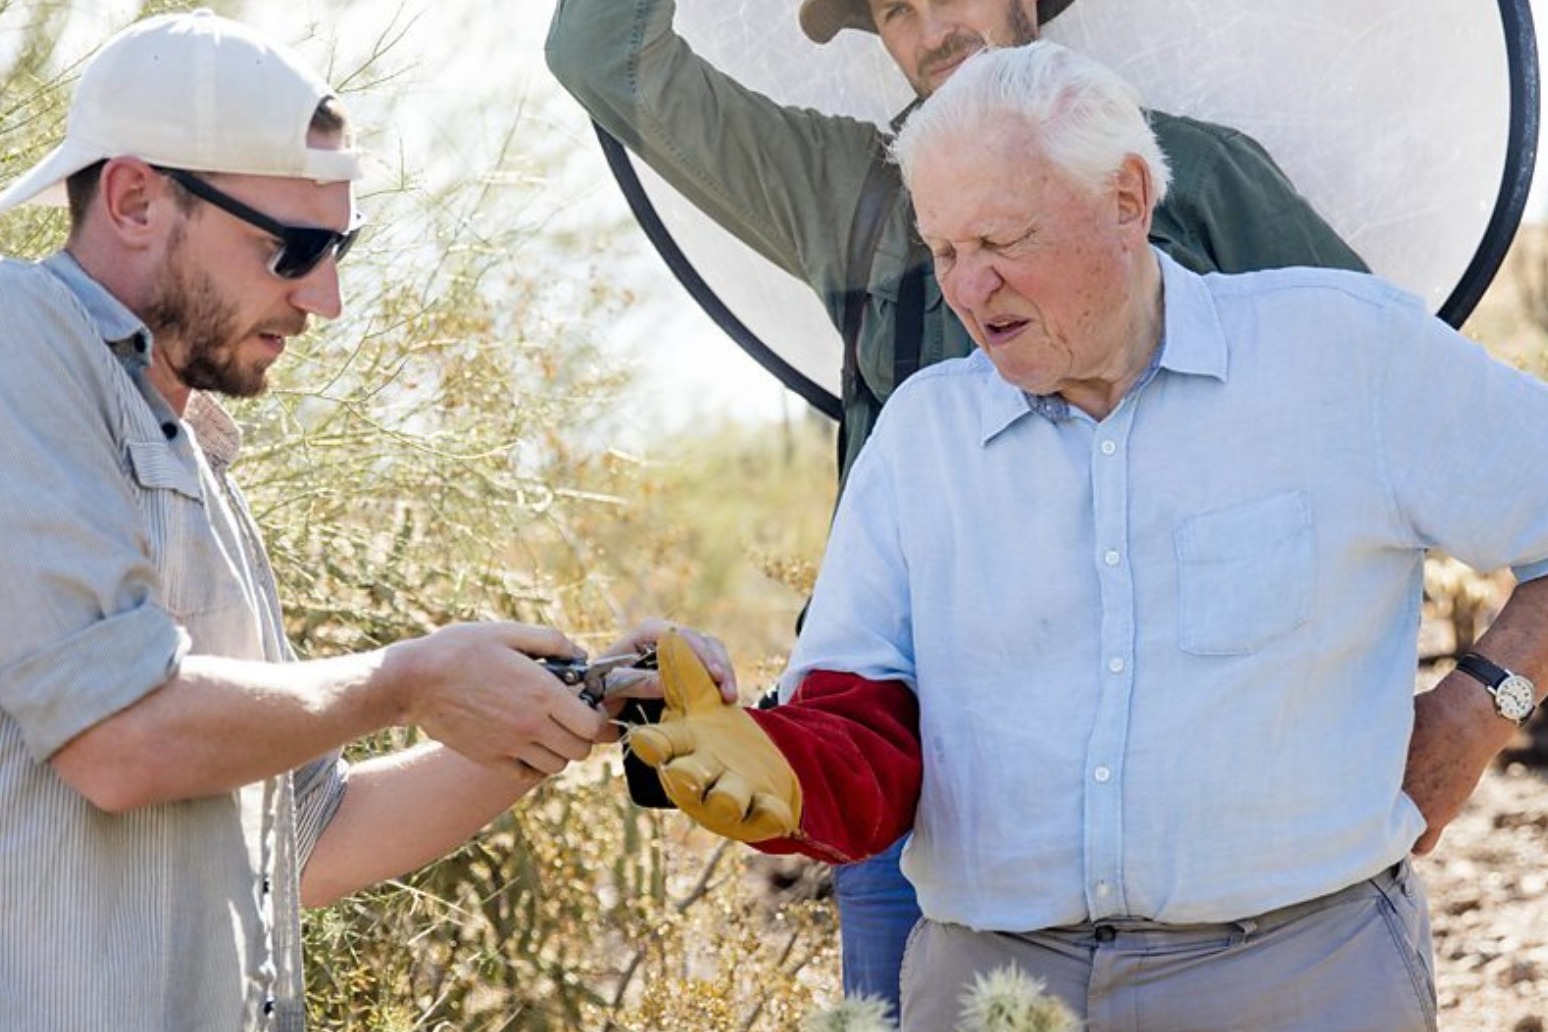 Sir David Attenborough spiked by ‘vicious spines’ of cactus in The Green Planet 